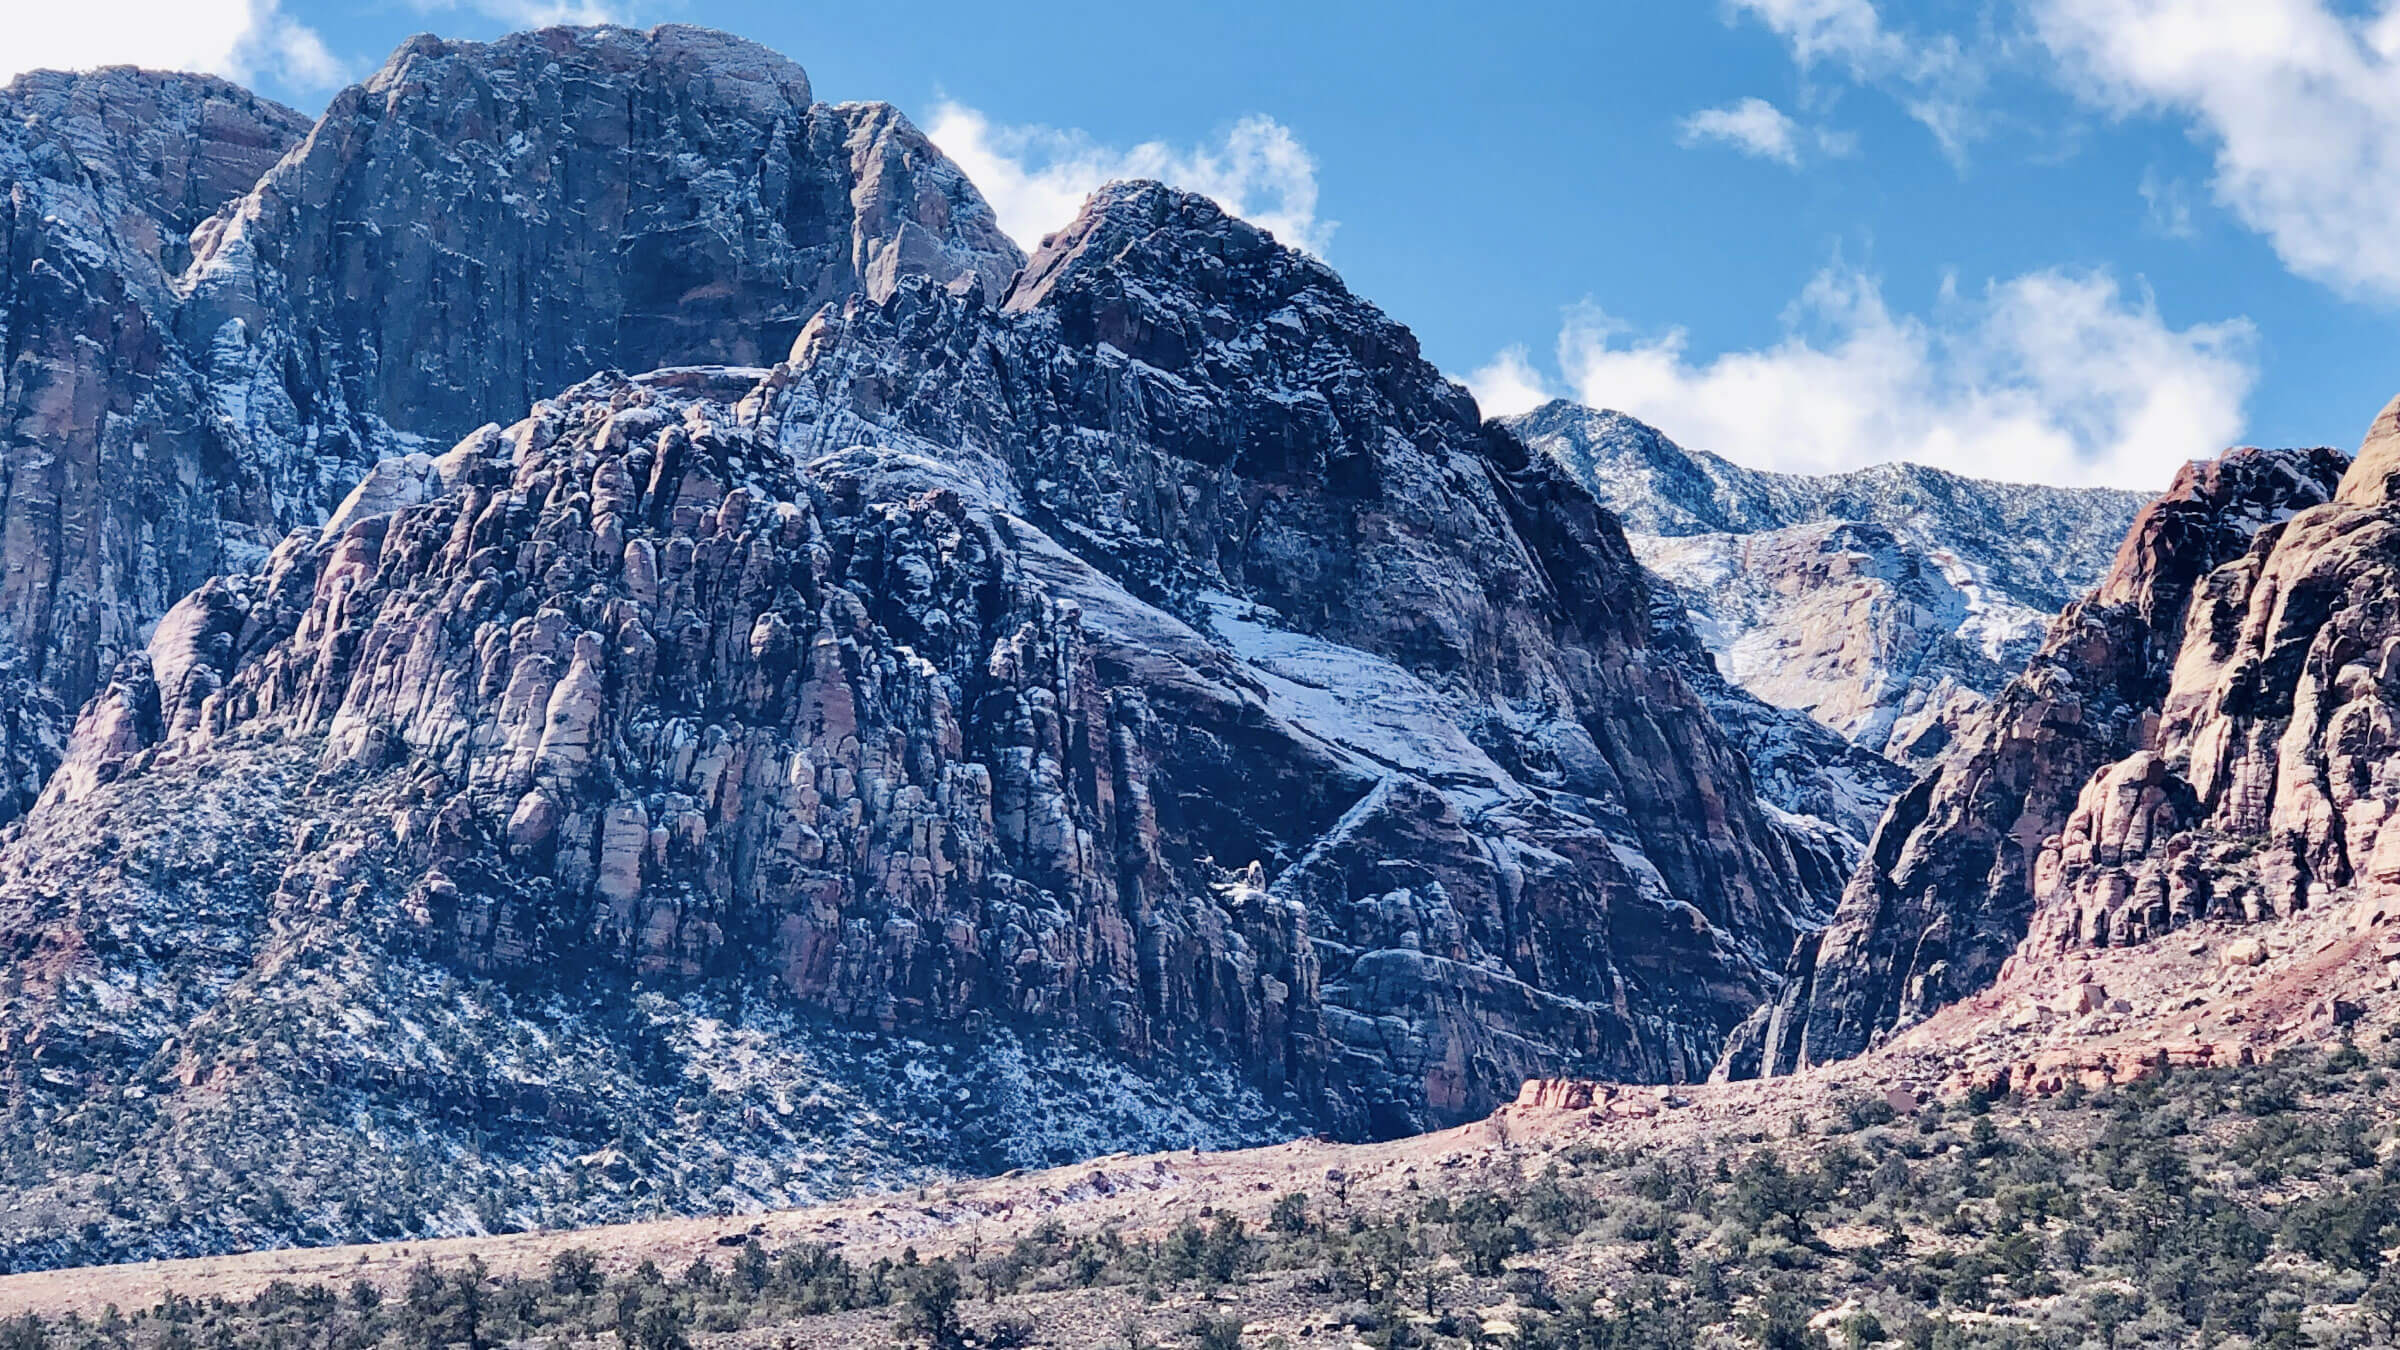 Snowy Red Rock Canyon